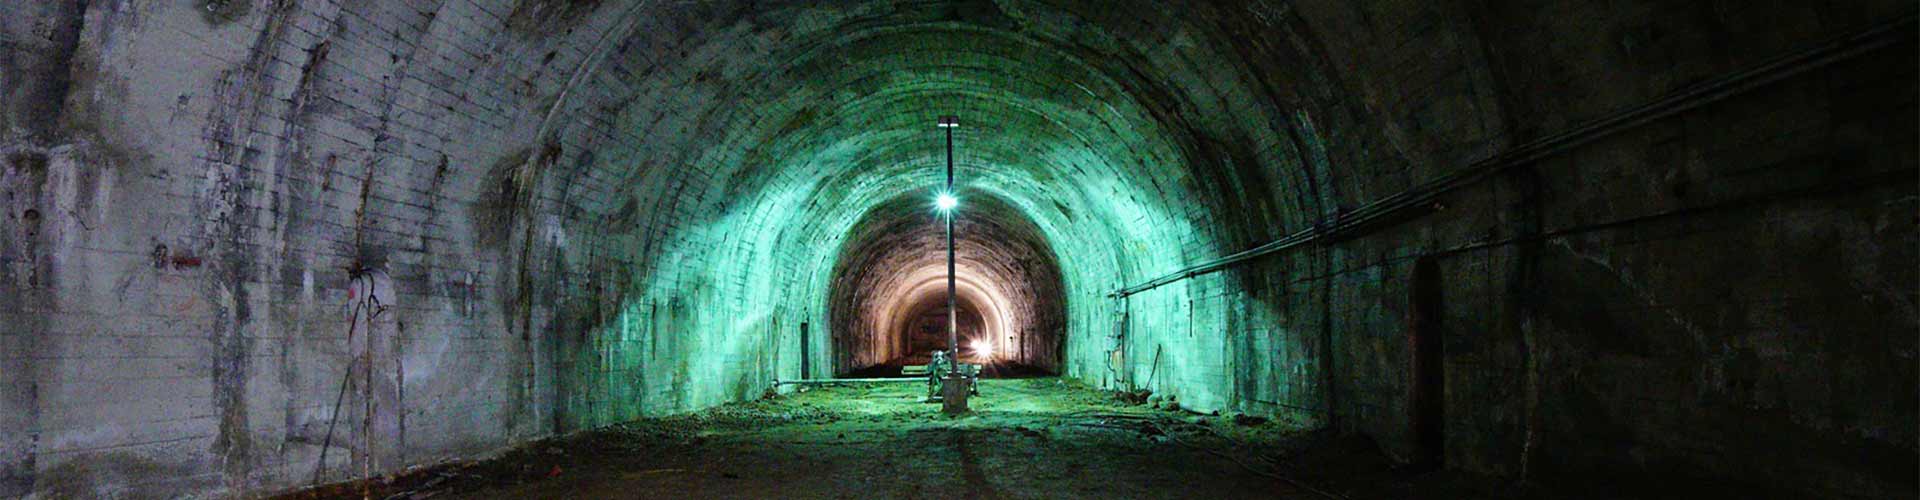 A tunnel with a green light in the middle.